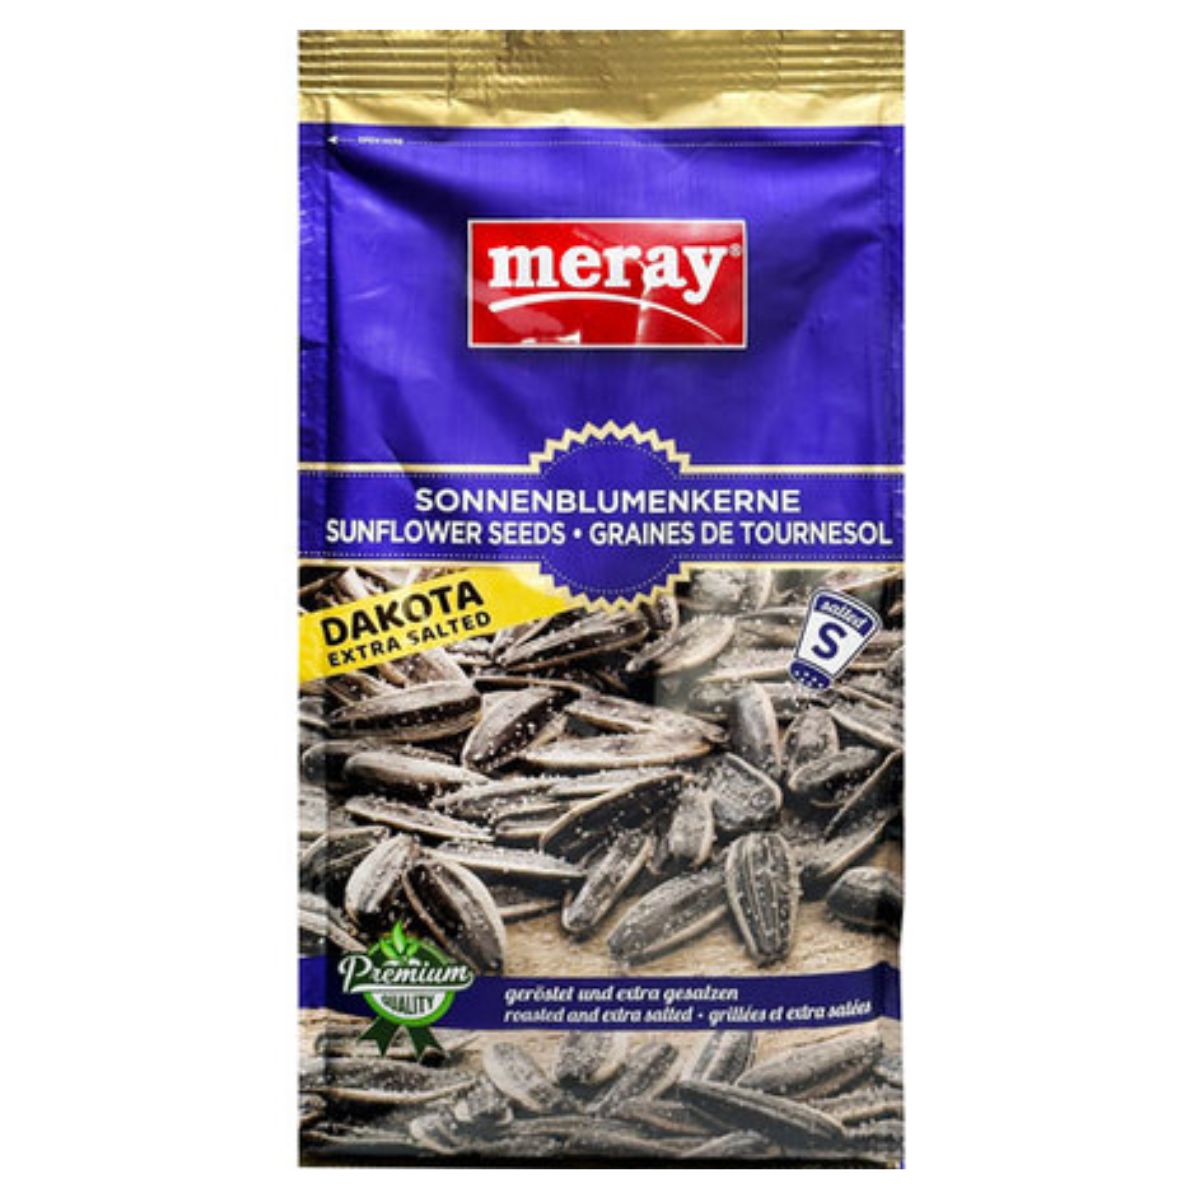 A package of Dakota Sunflower Seeds Roasted and Extra Salted Shell - 250g.